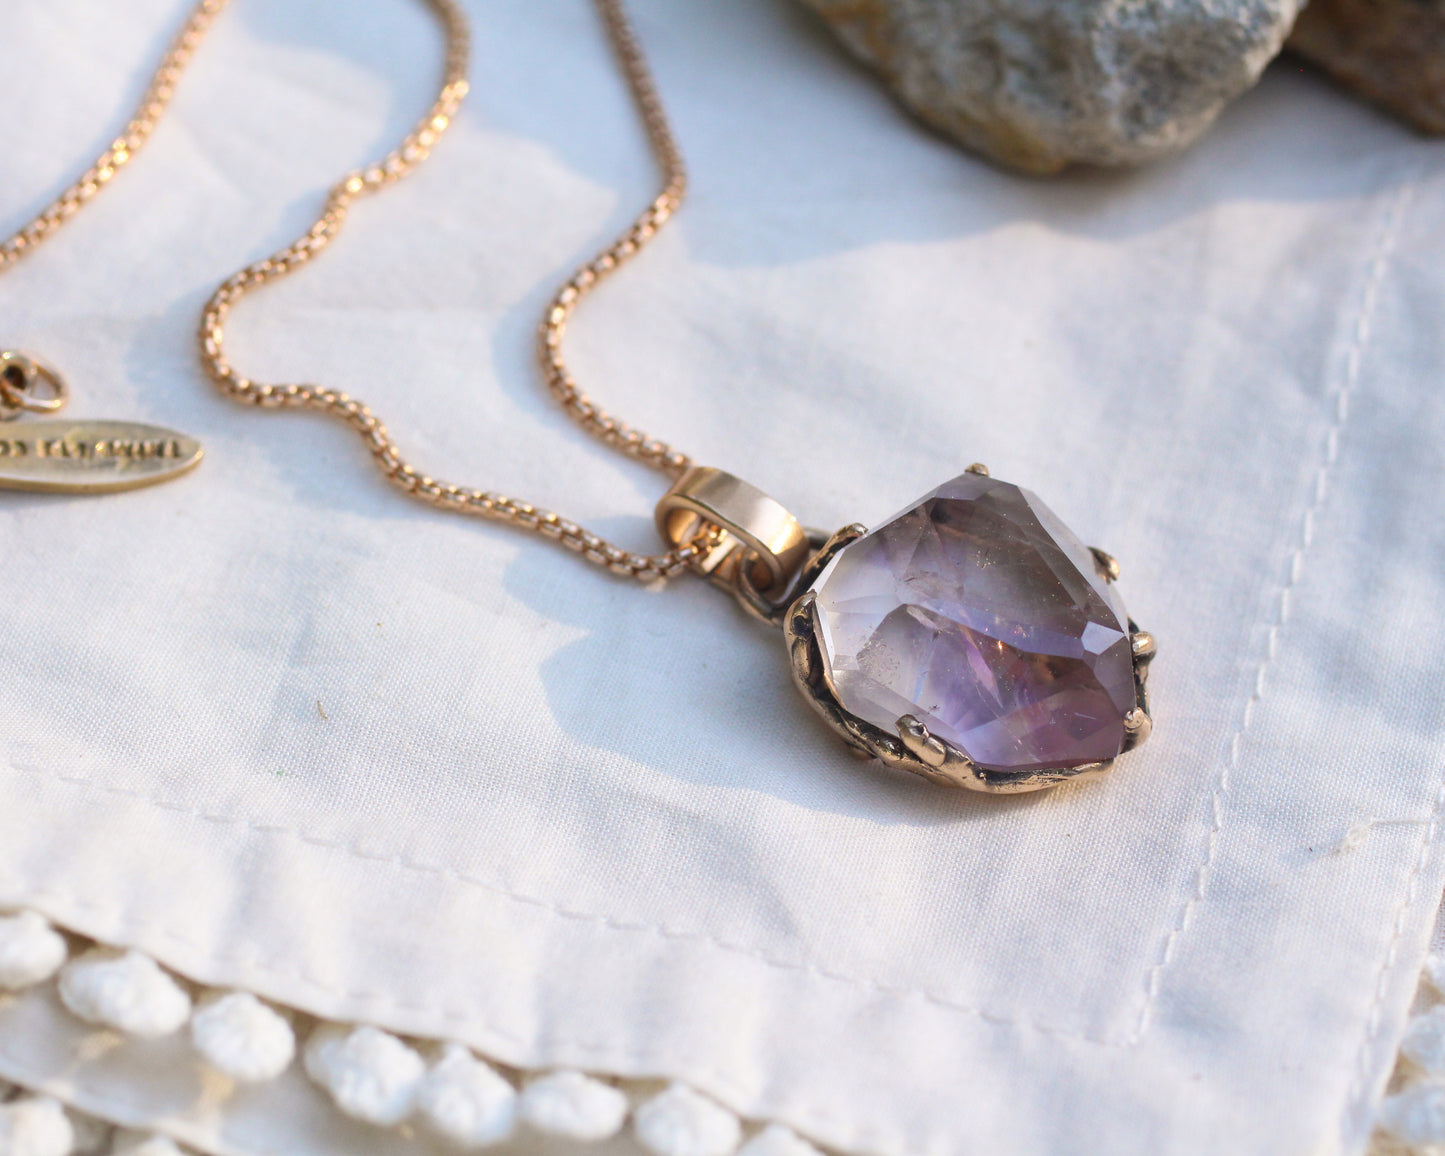 Large hand-faceted Smoky-Amethyst necklace